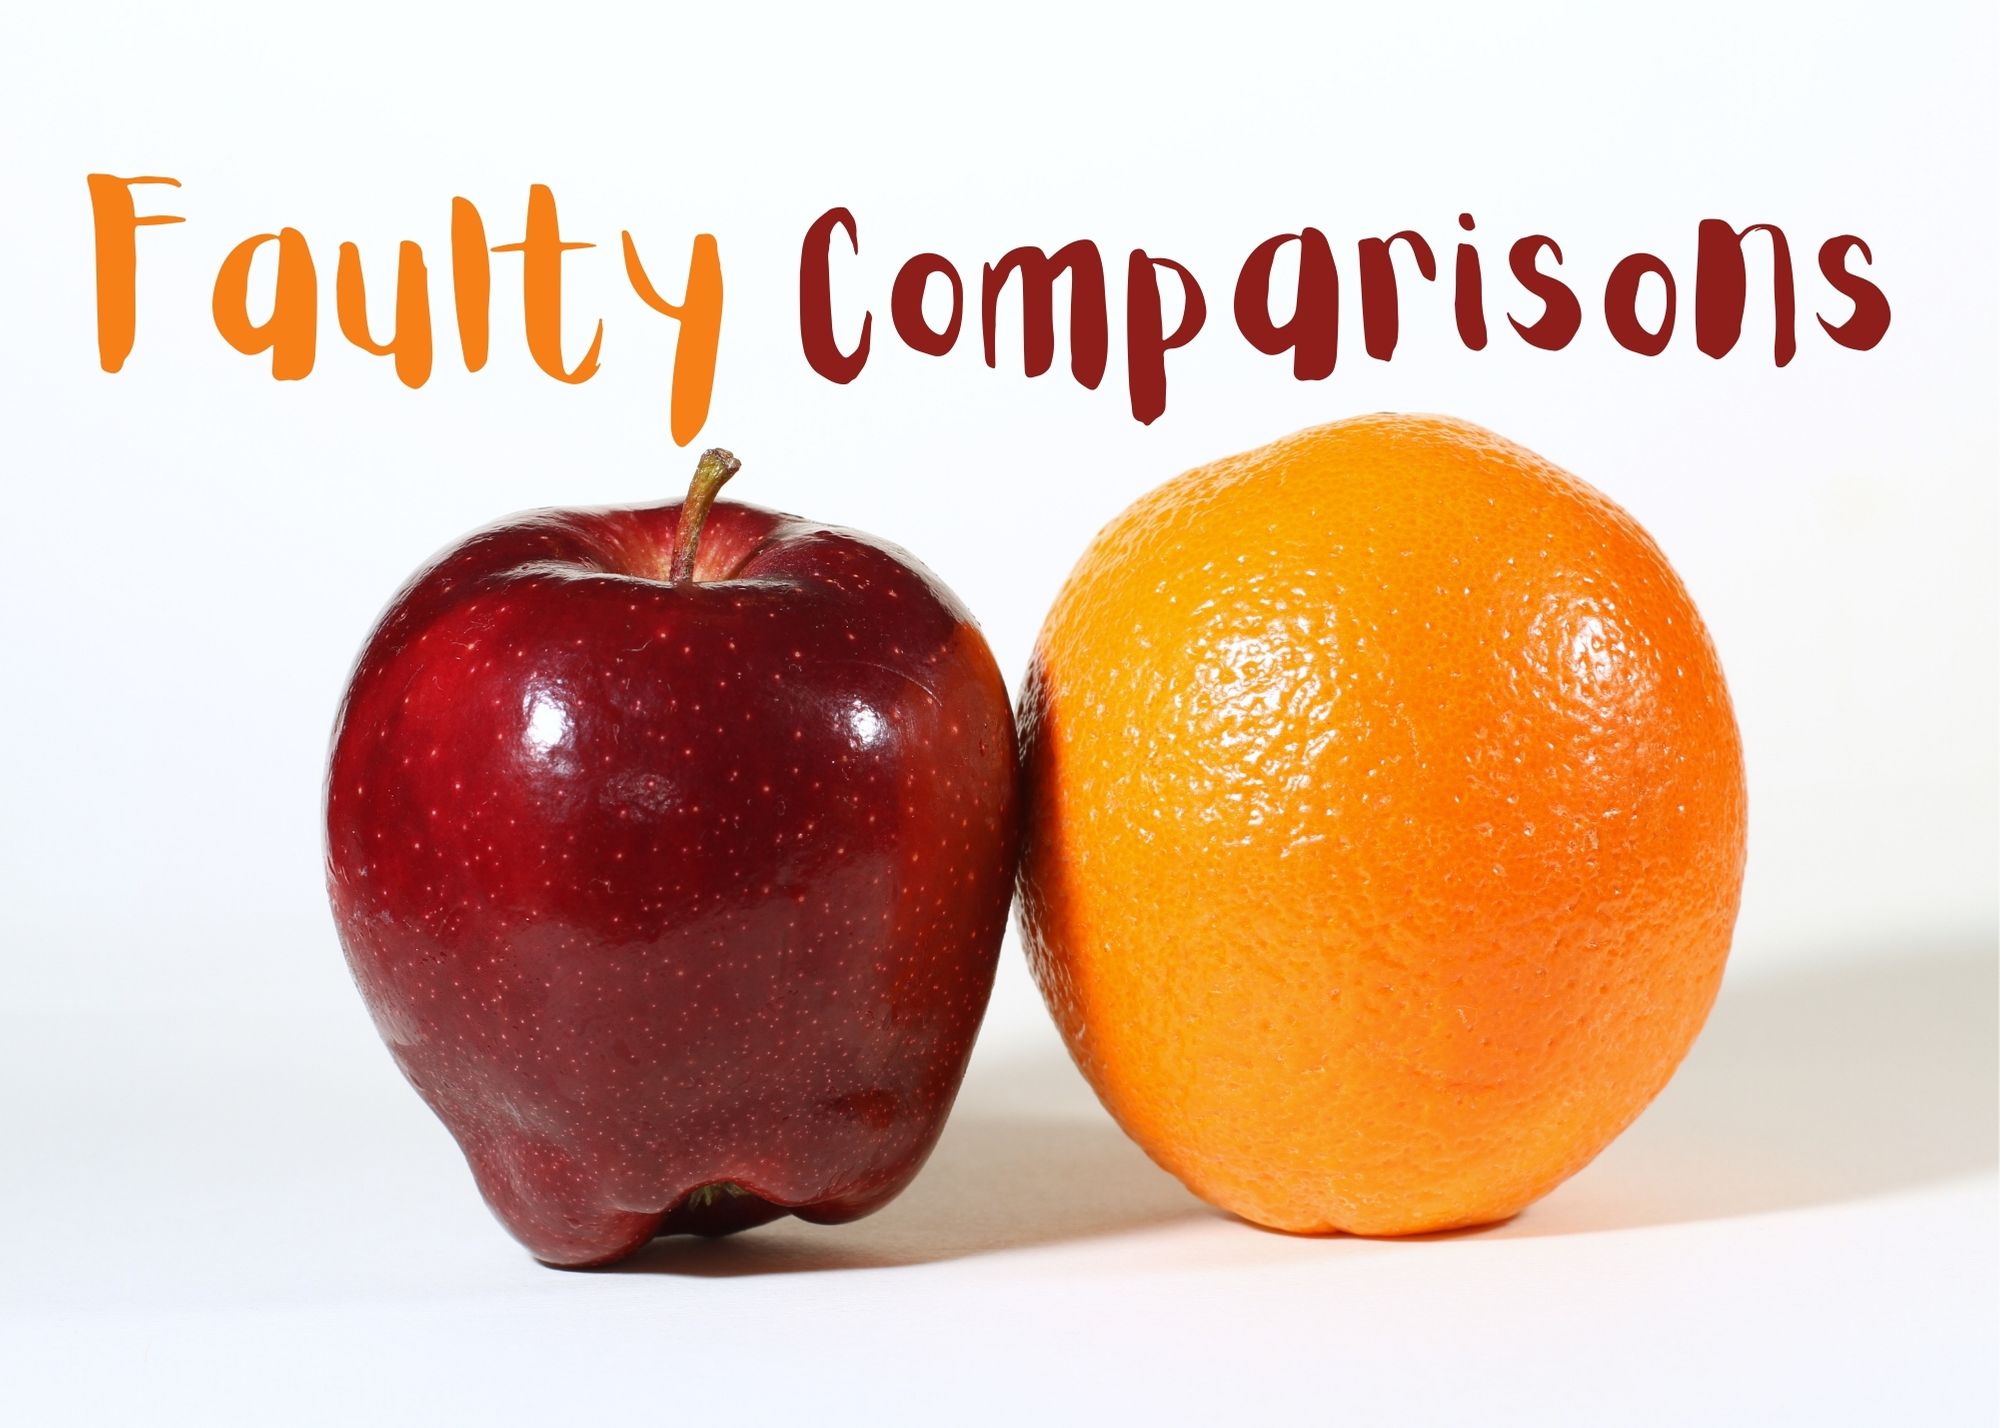 an apple and an orange and the words "faulty comparison" above them